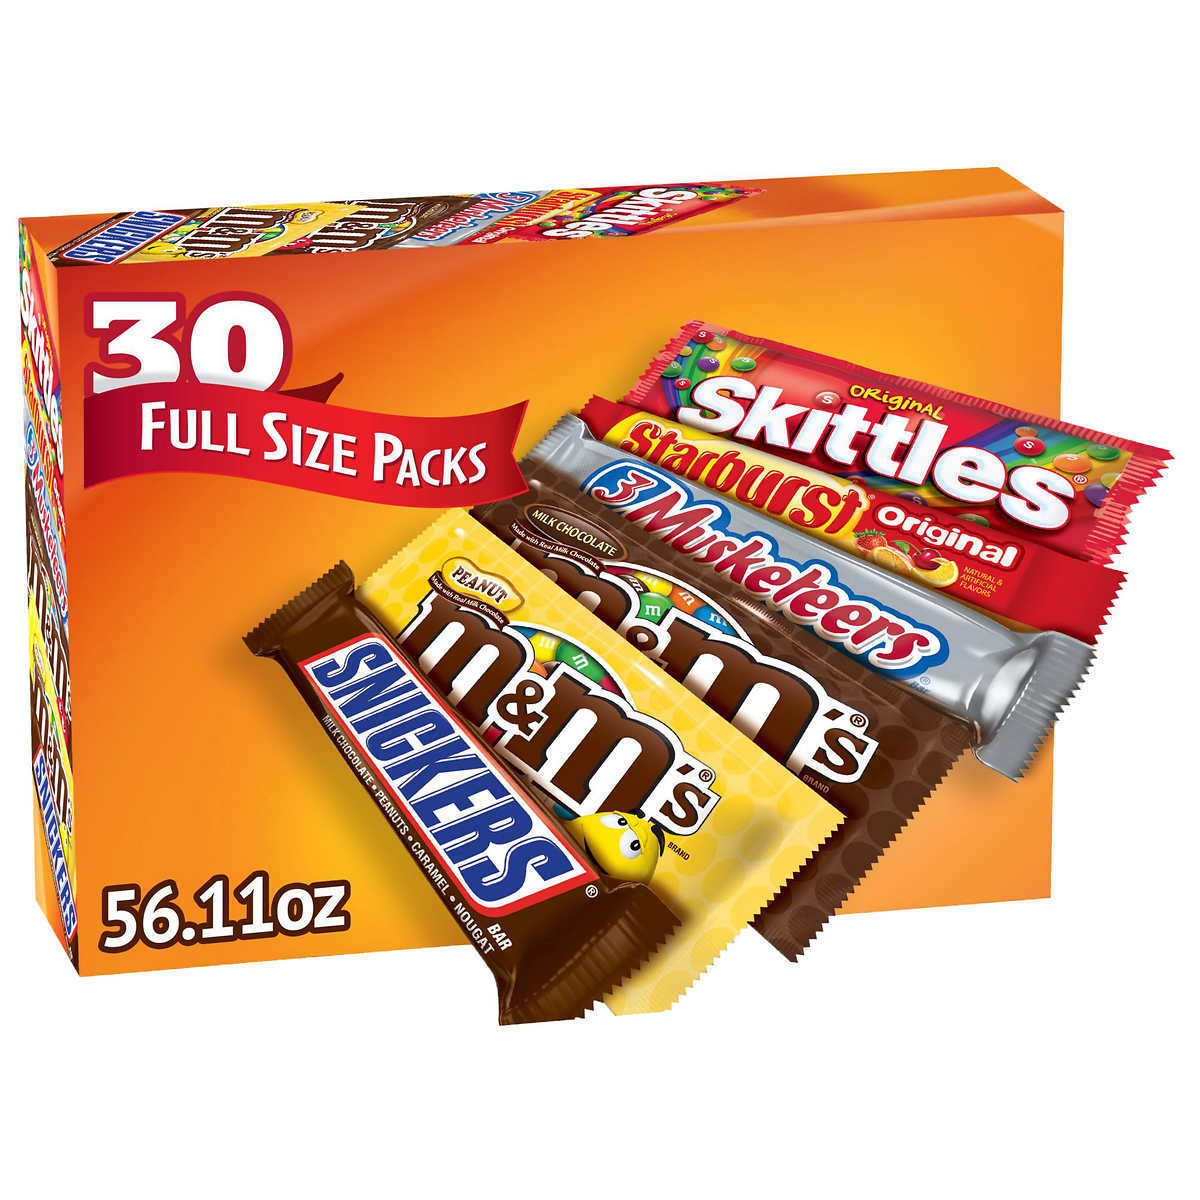 M&M'S Chocolate Candy Assorted Fun Size Bulk Variety Pack (115 ct., 4 lbs)  - Sam's Club